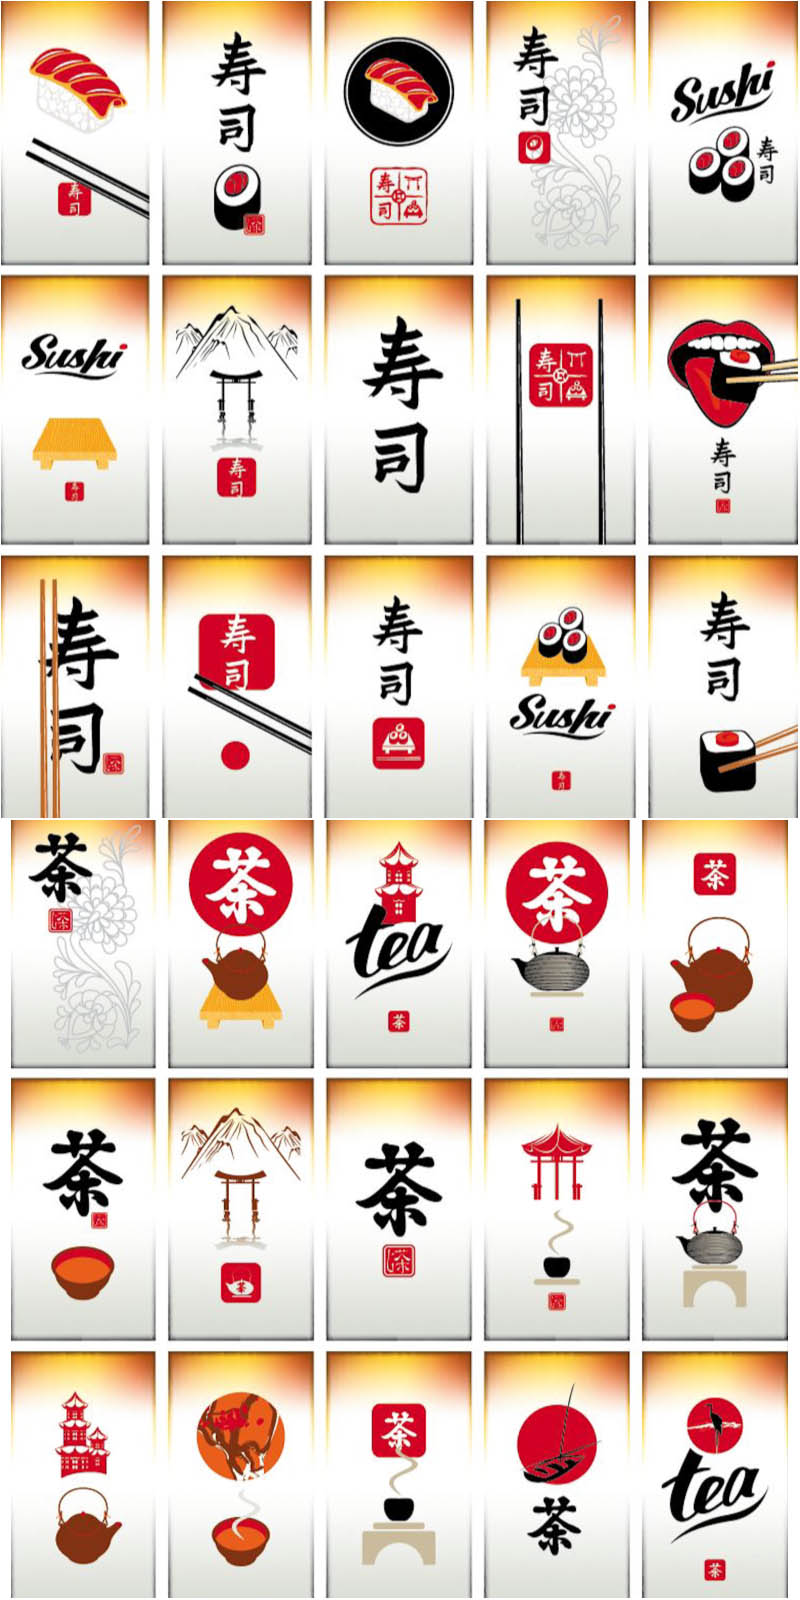 Cards on japan style vector